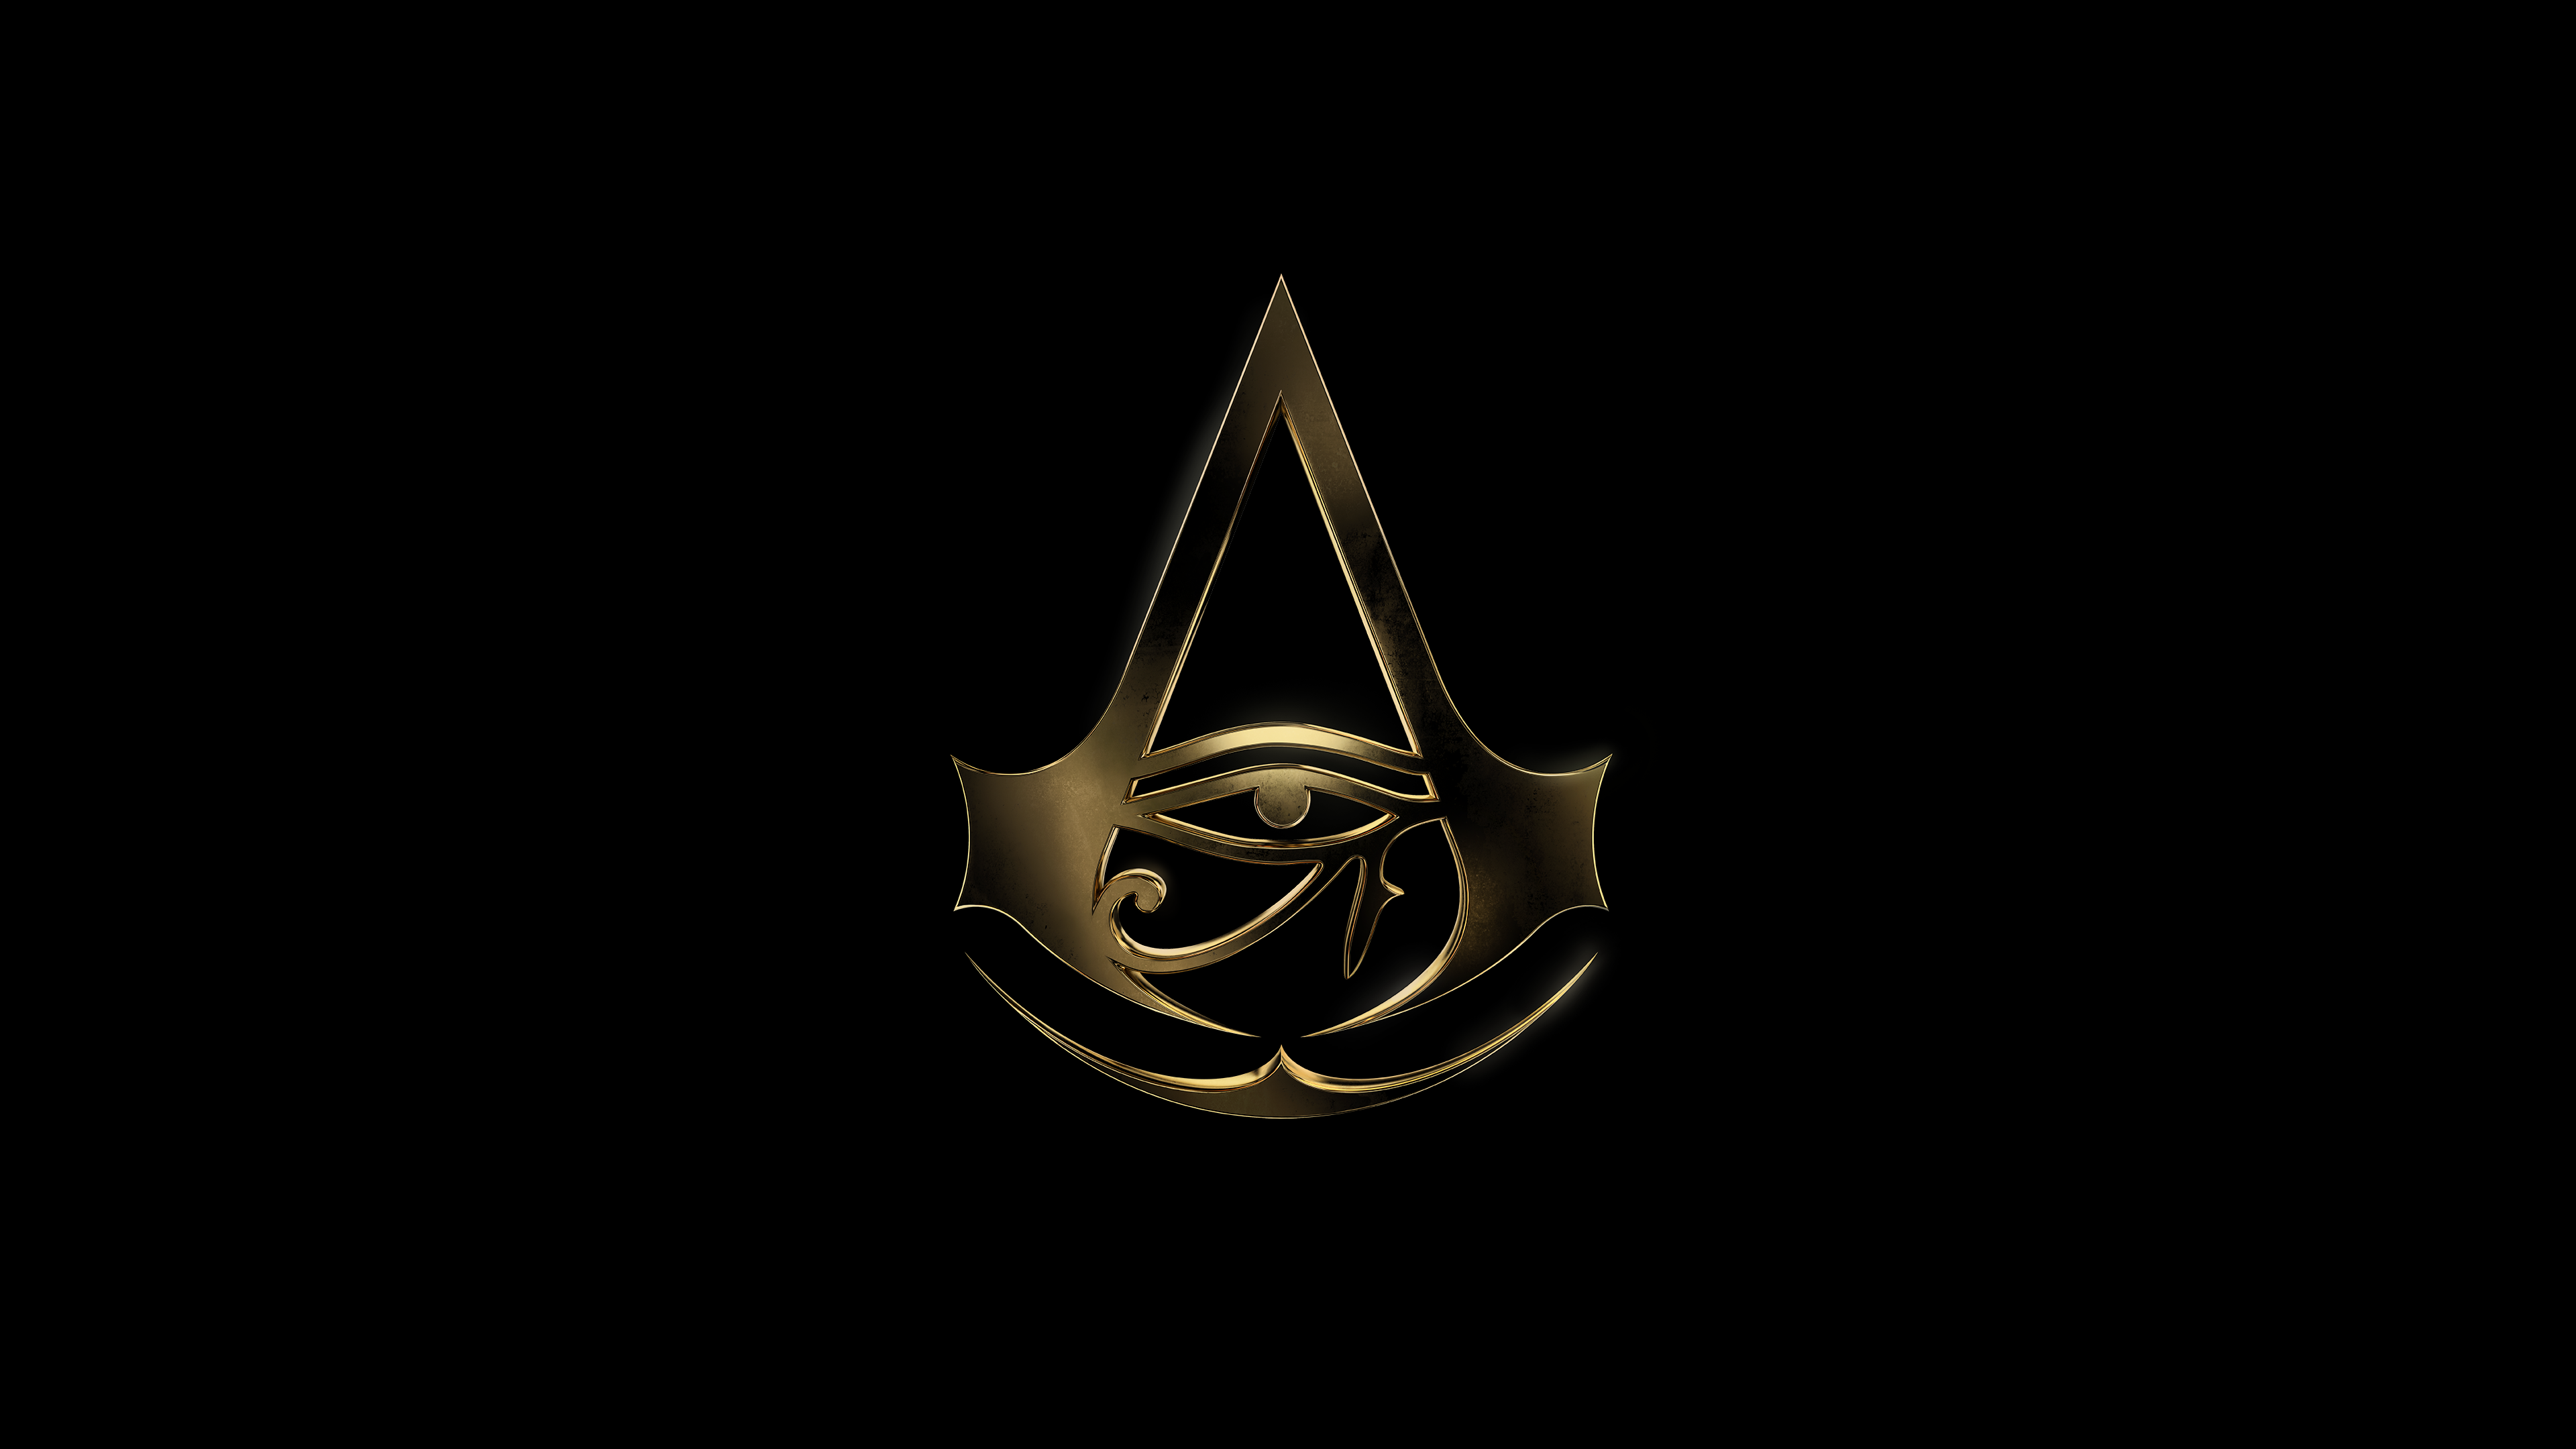 General 3840x2160 Assassin's Creed video games Egypt Egyptian Eye of Horus Assassin's Creed: Origins black background Ubisoft